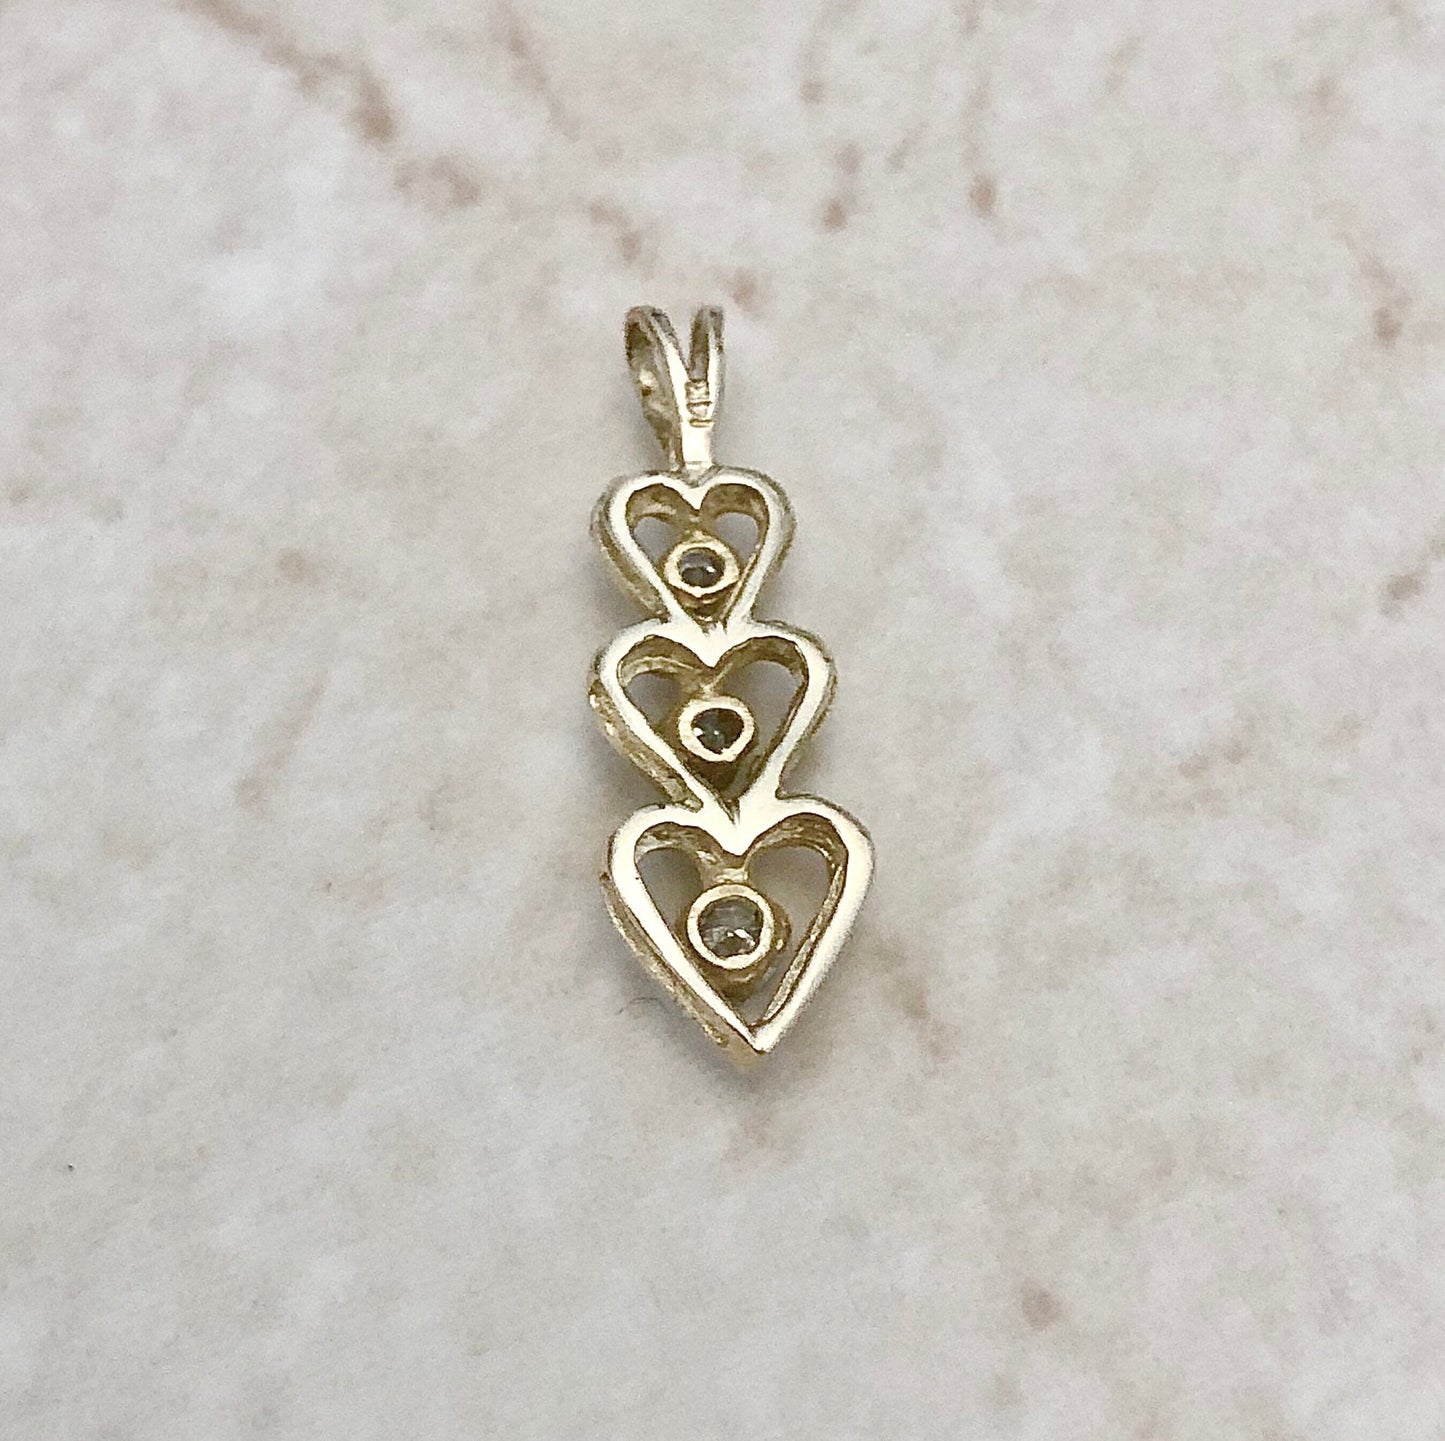 14K Gold Diamond Heart Pendant Necklace - Yellow Gold Diamond Pendant - Gold Heart Necklace - Best Gifts For Her - Valentine’s Day Gifts